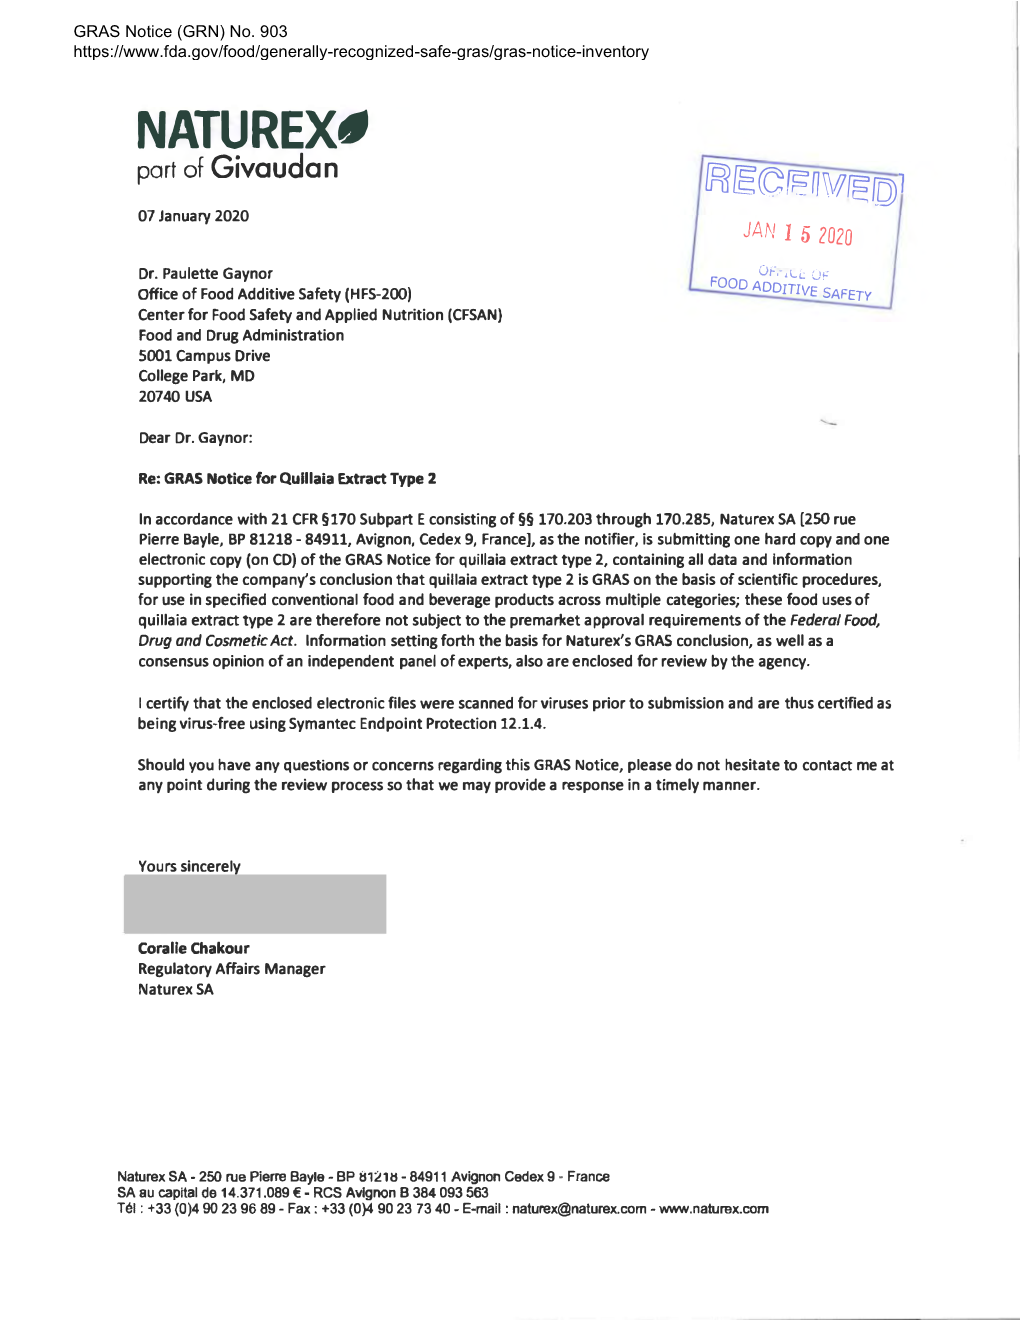 GRAS Notice (GRN) No. 903, Quillaia Extract Type 2